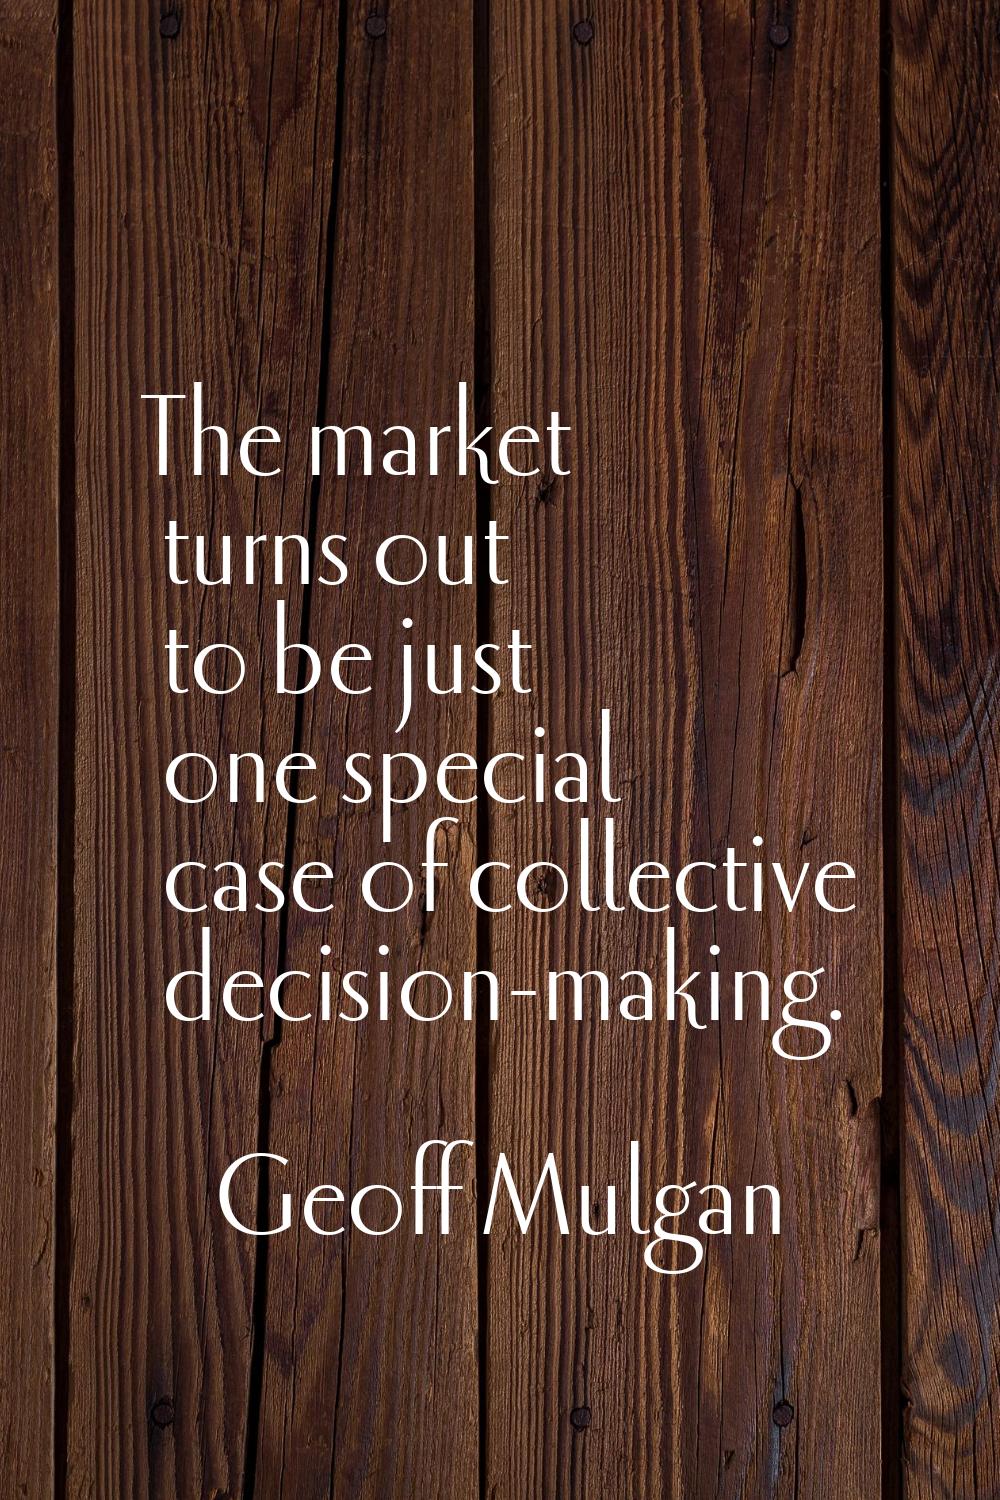 The market turns out to be just one special case of collective decision-making.